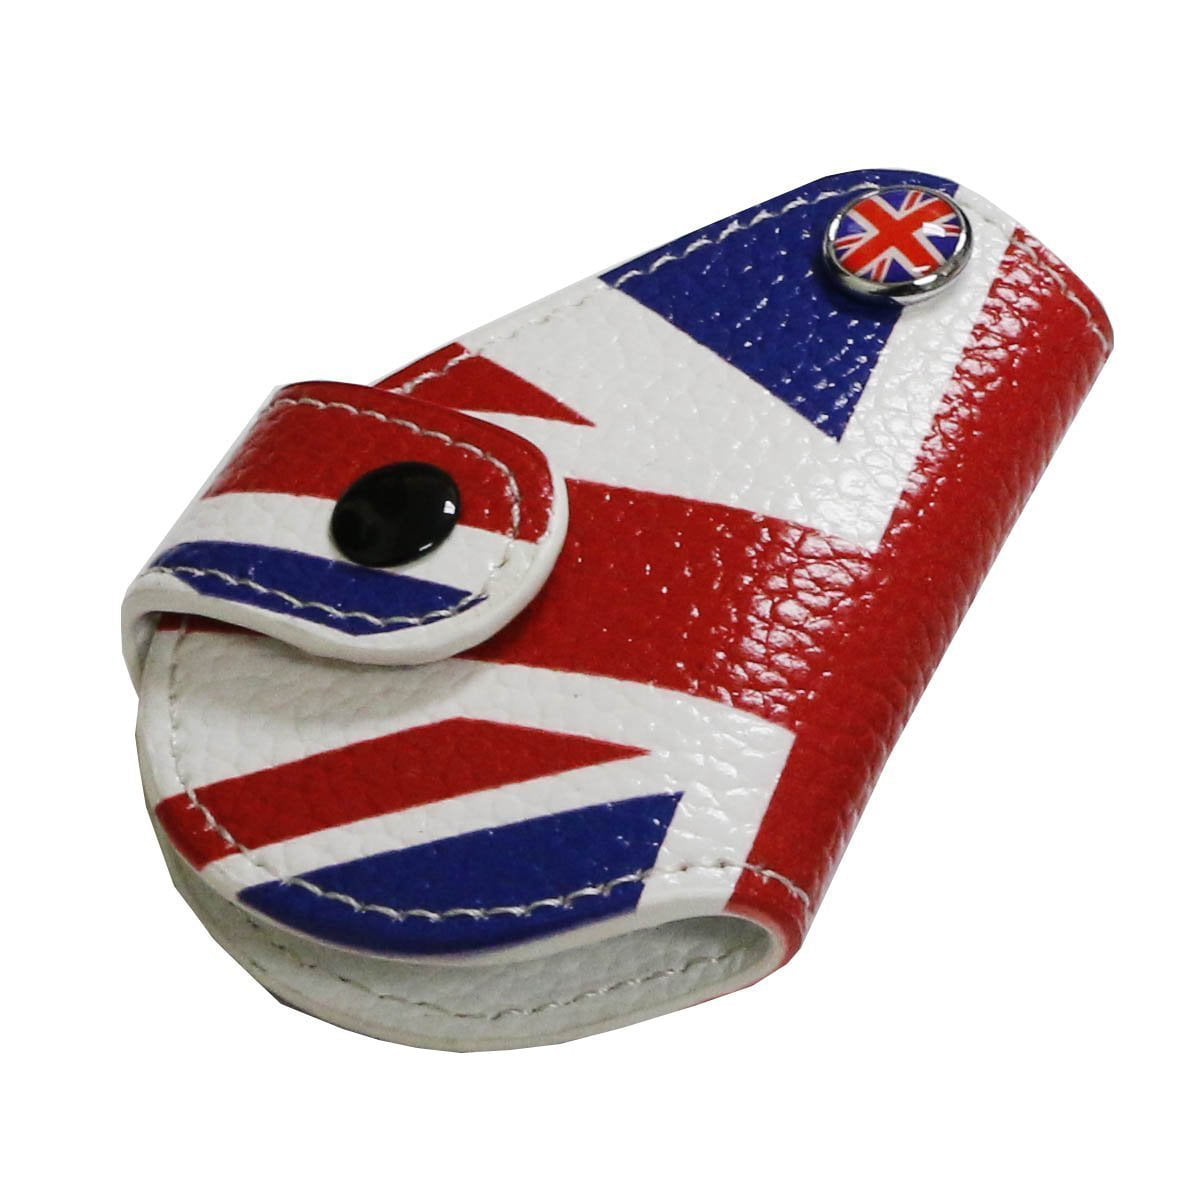 iJDMTOY 1 Red Blue Union Jack UK Flag Style Real Leather Key Fob Cover Holder for 2008-up Mini Cooper R55 R56 R57 R58 R59 R60 R61 F55 F56 